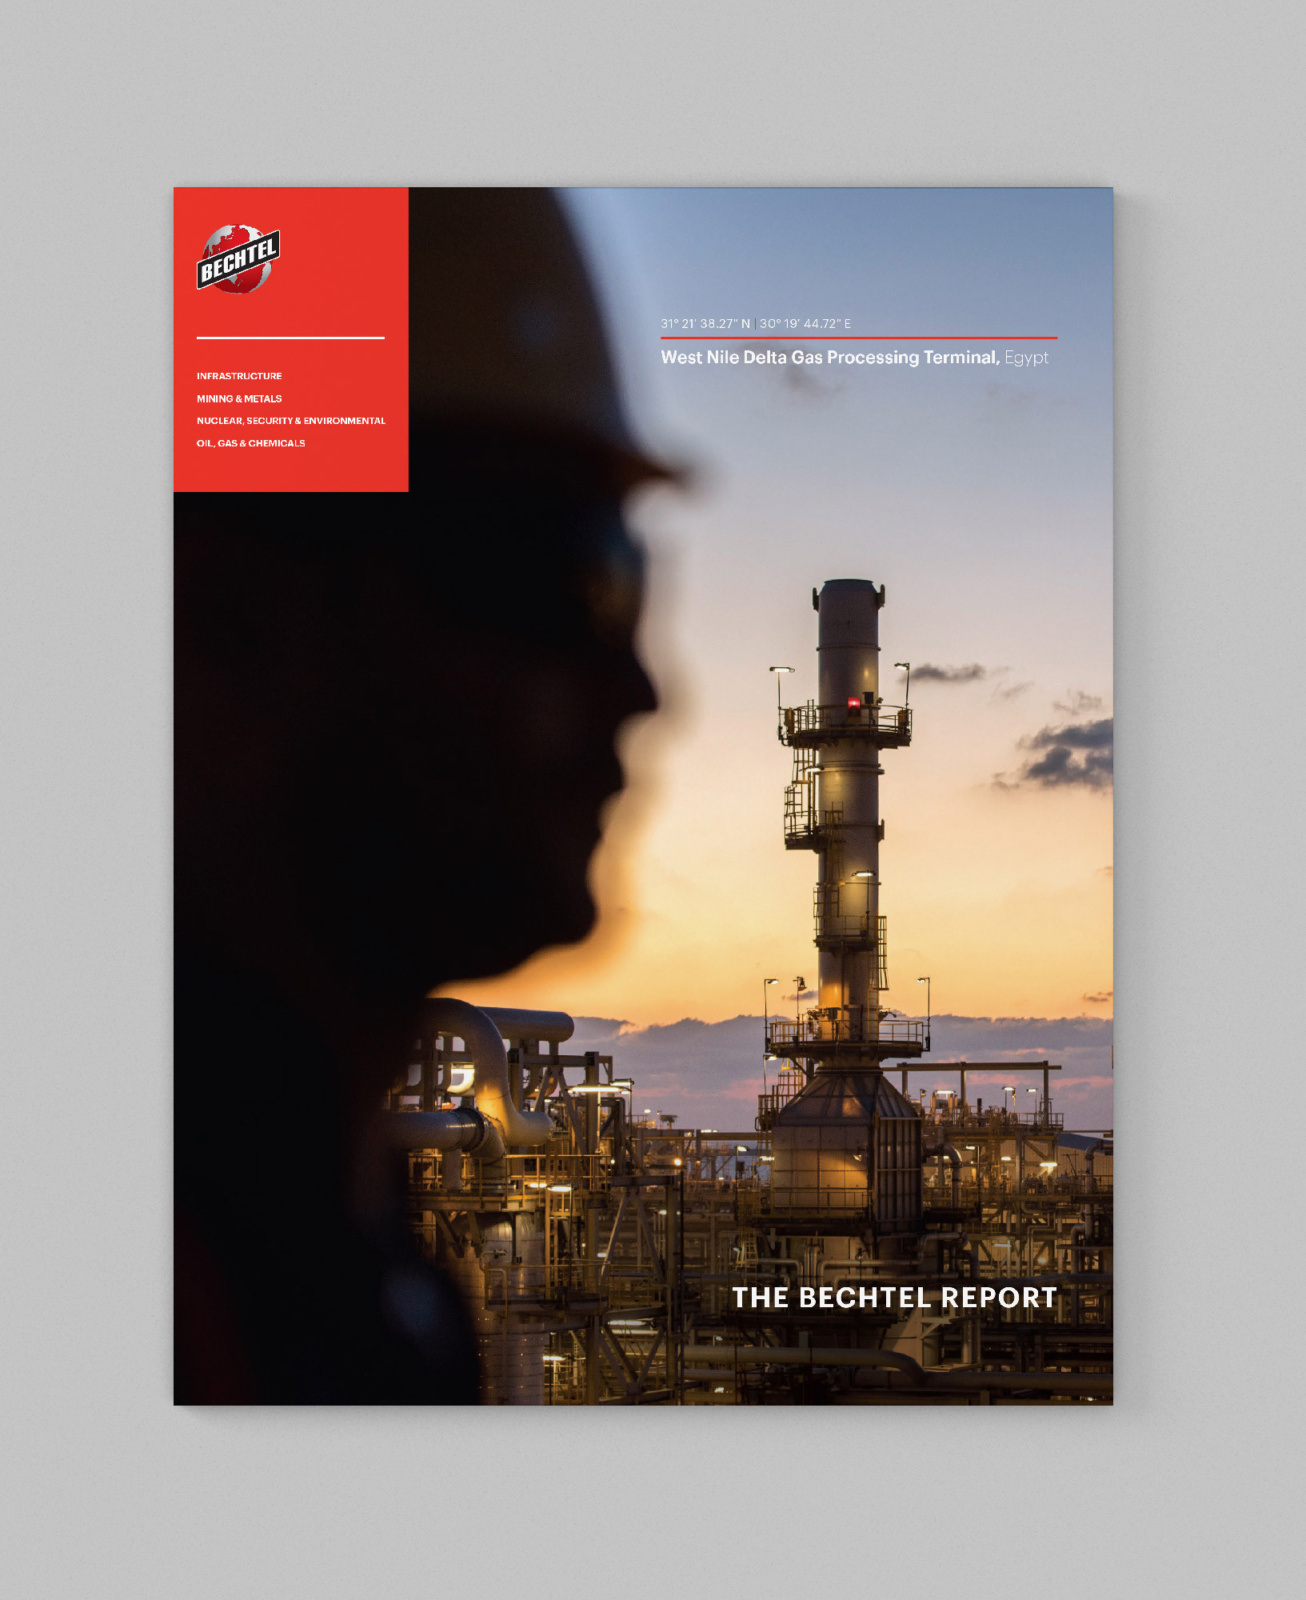 The Bechtel annual report cover design, featuring employee in foreground with West Nile Delta Terminal in background